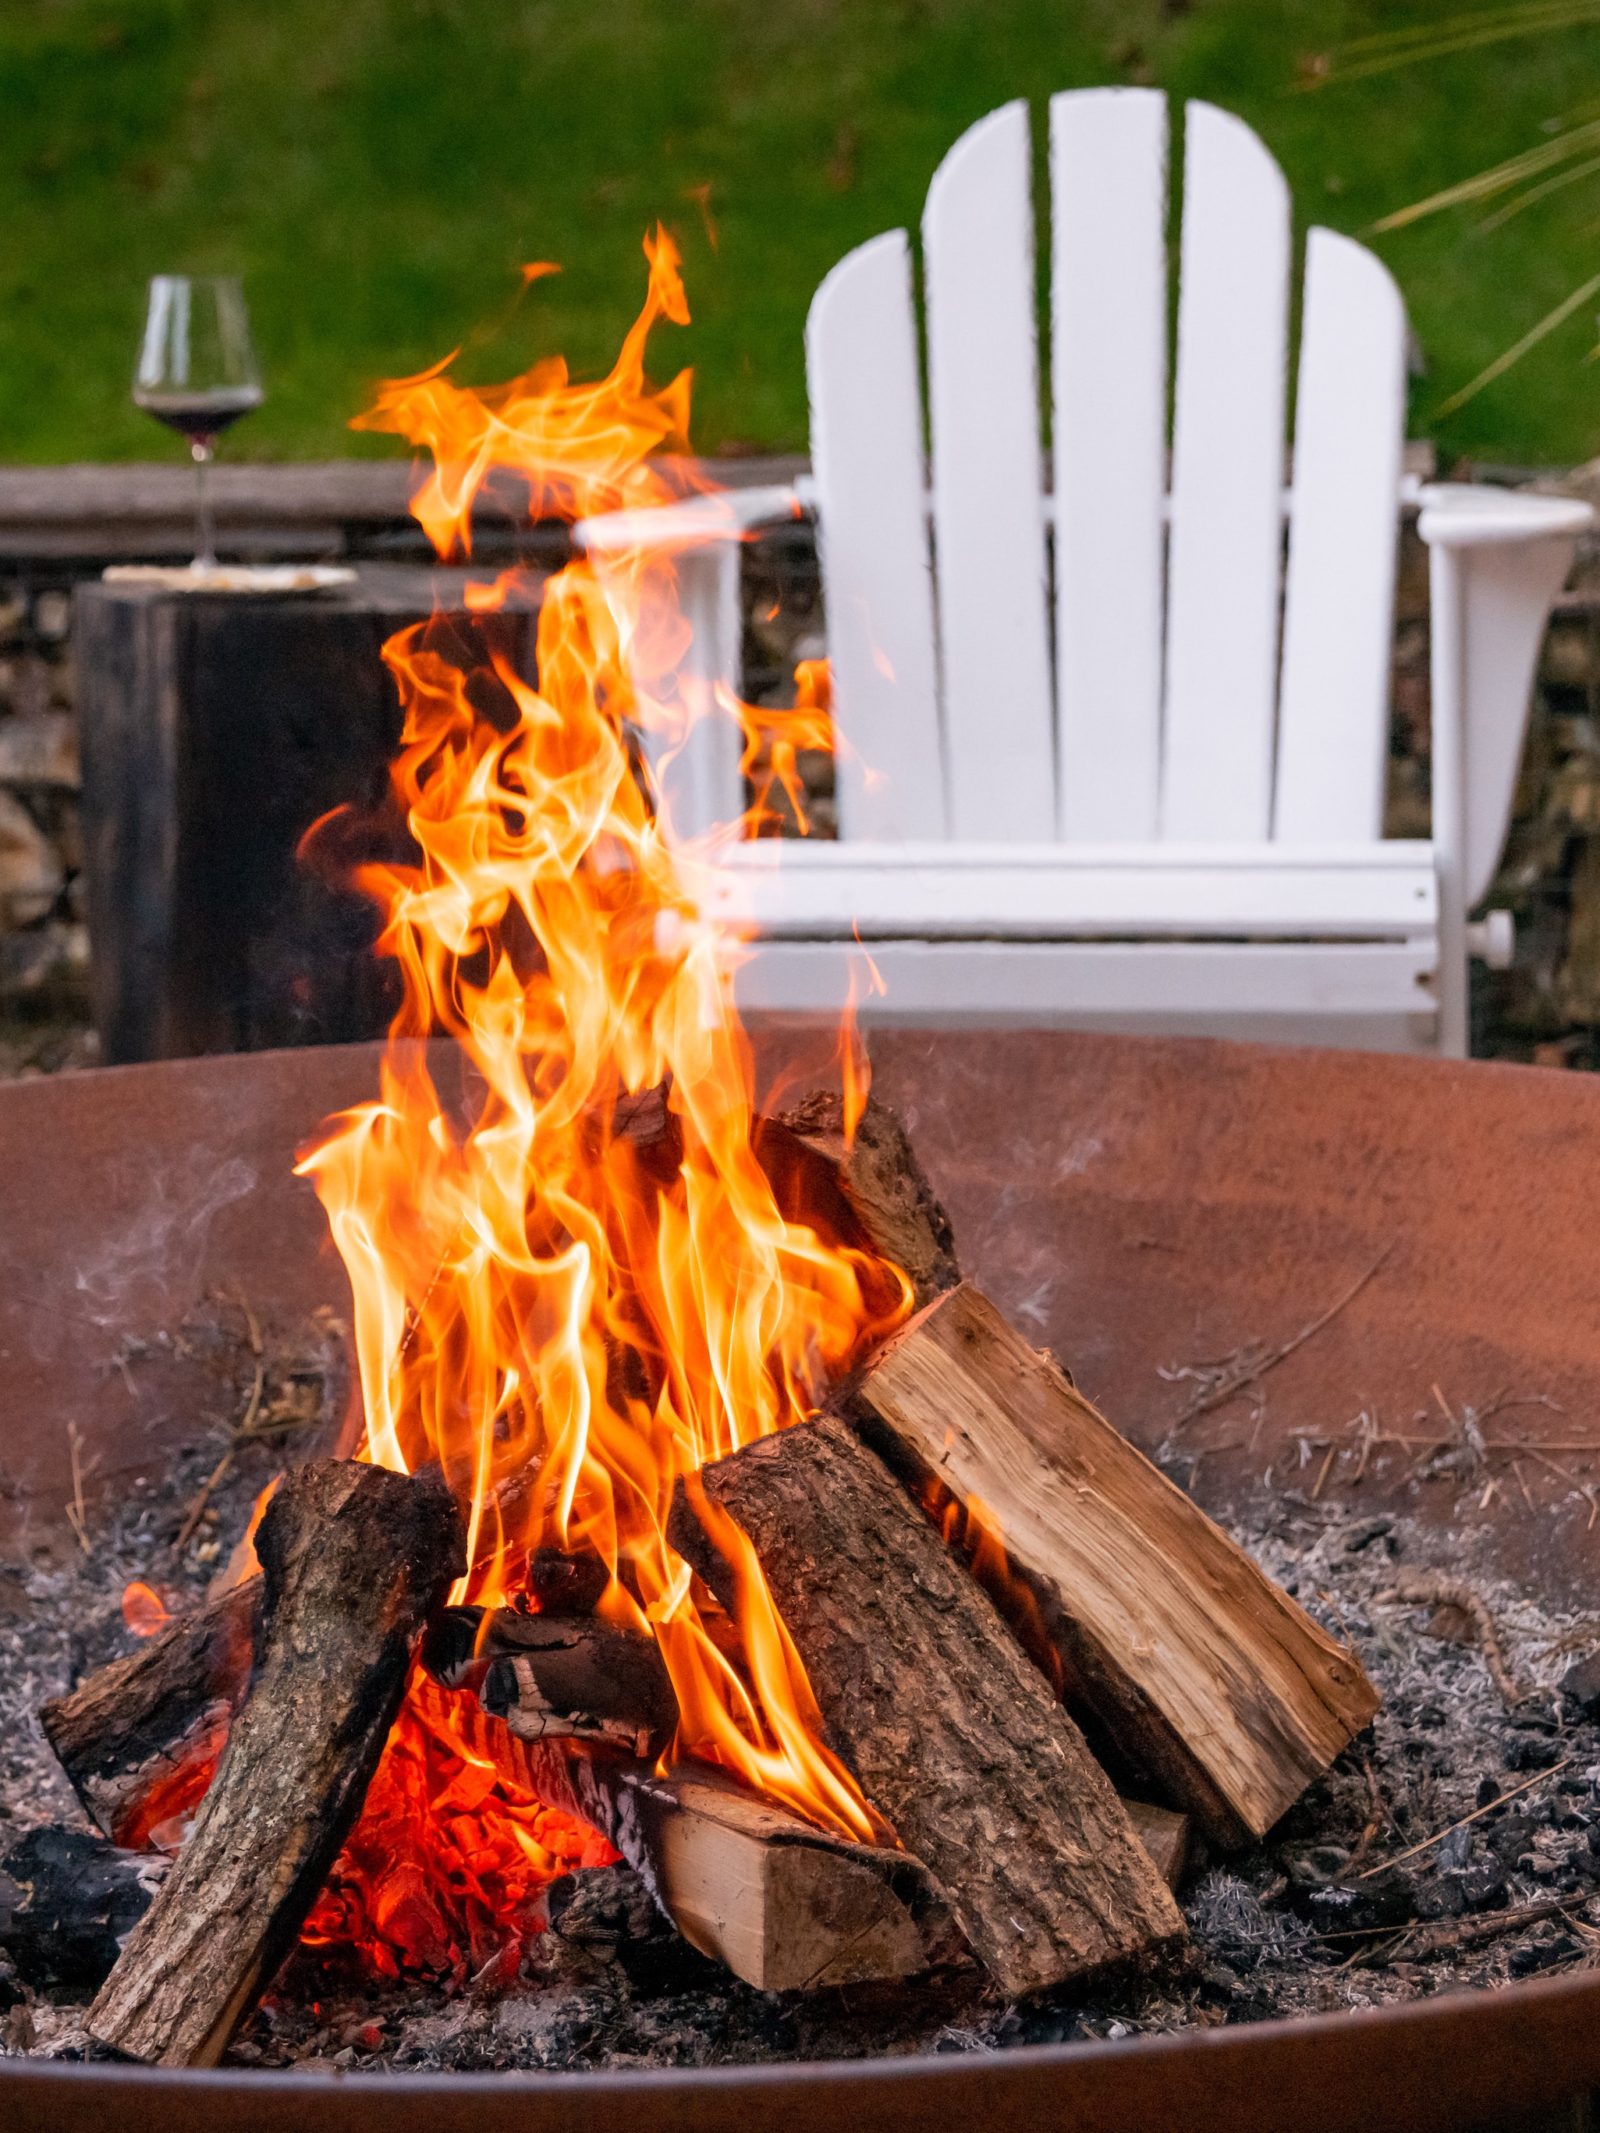 Fire Pit On Your Wood Or Composite Deck, Wood Burning Fire Pits For Decks